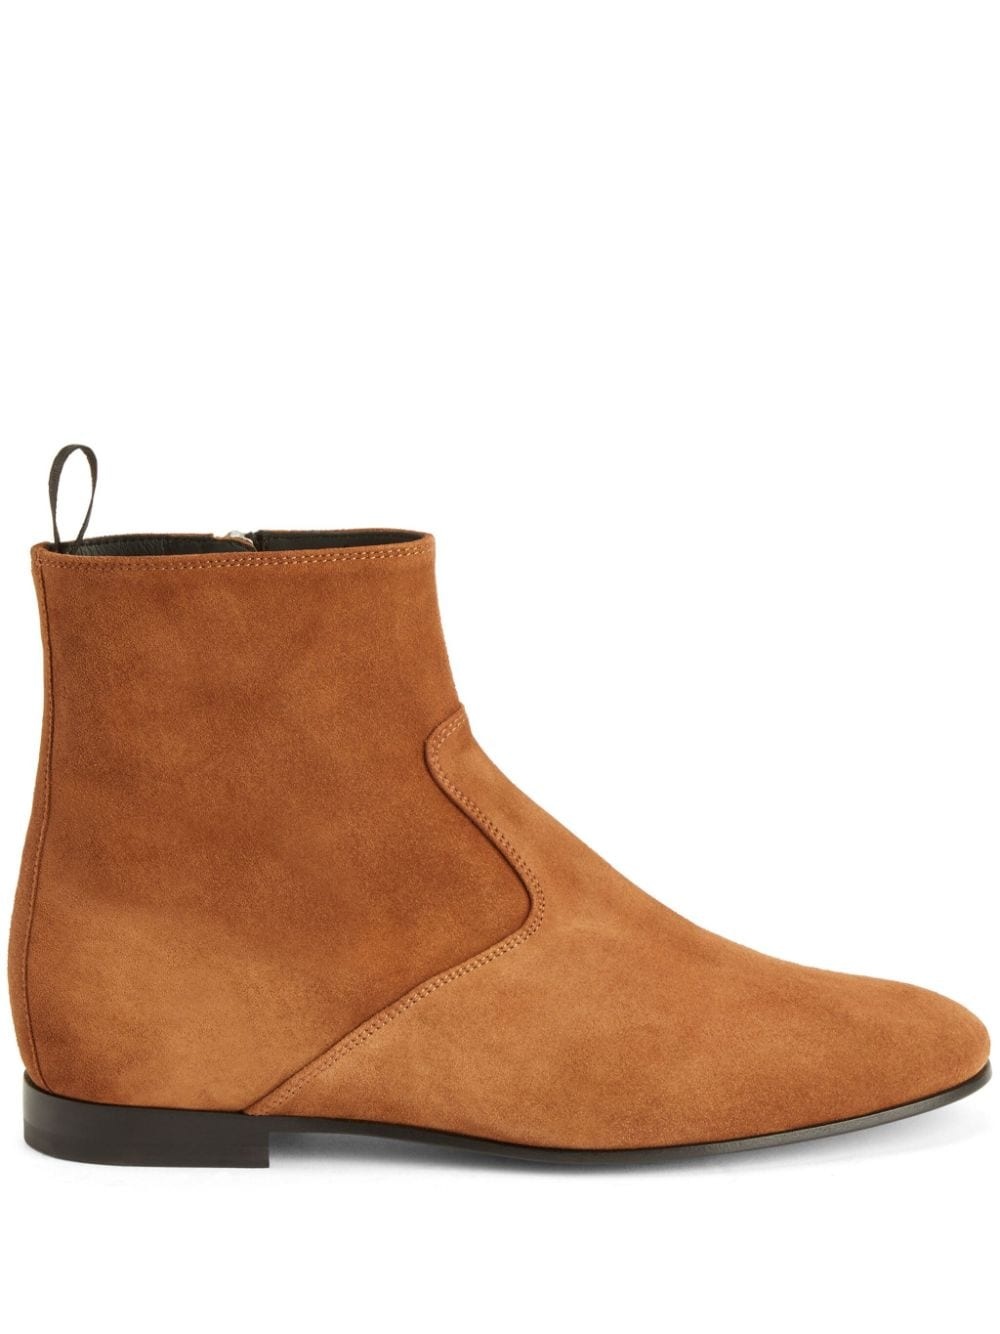 Ron panelled suede ankle boots - 1